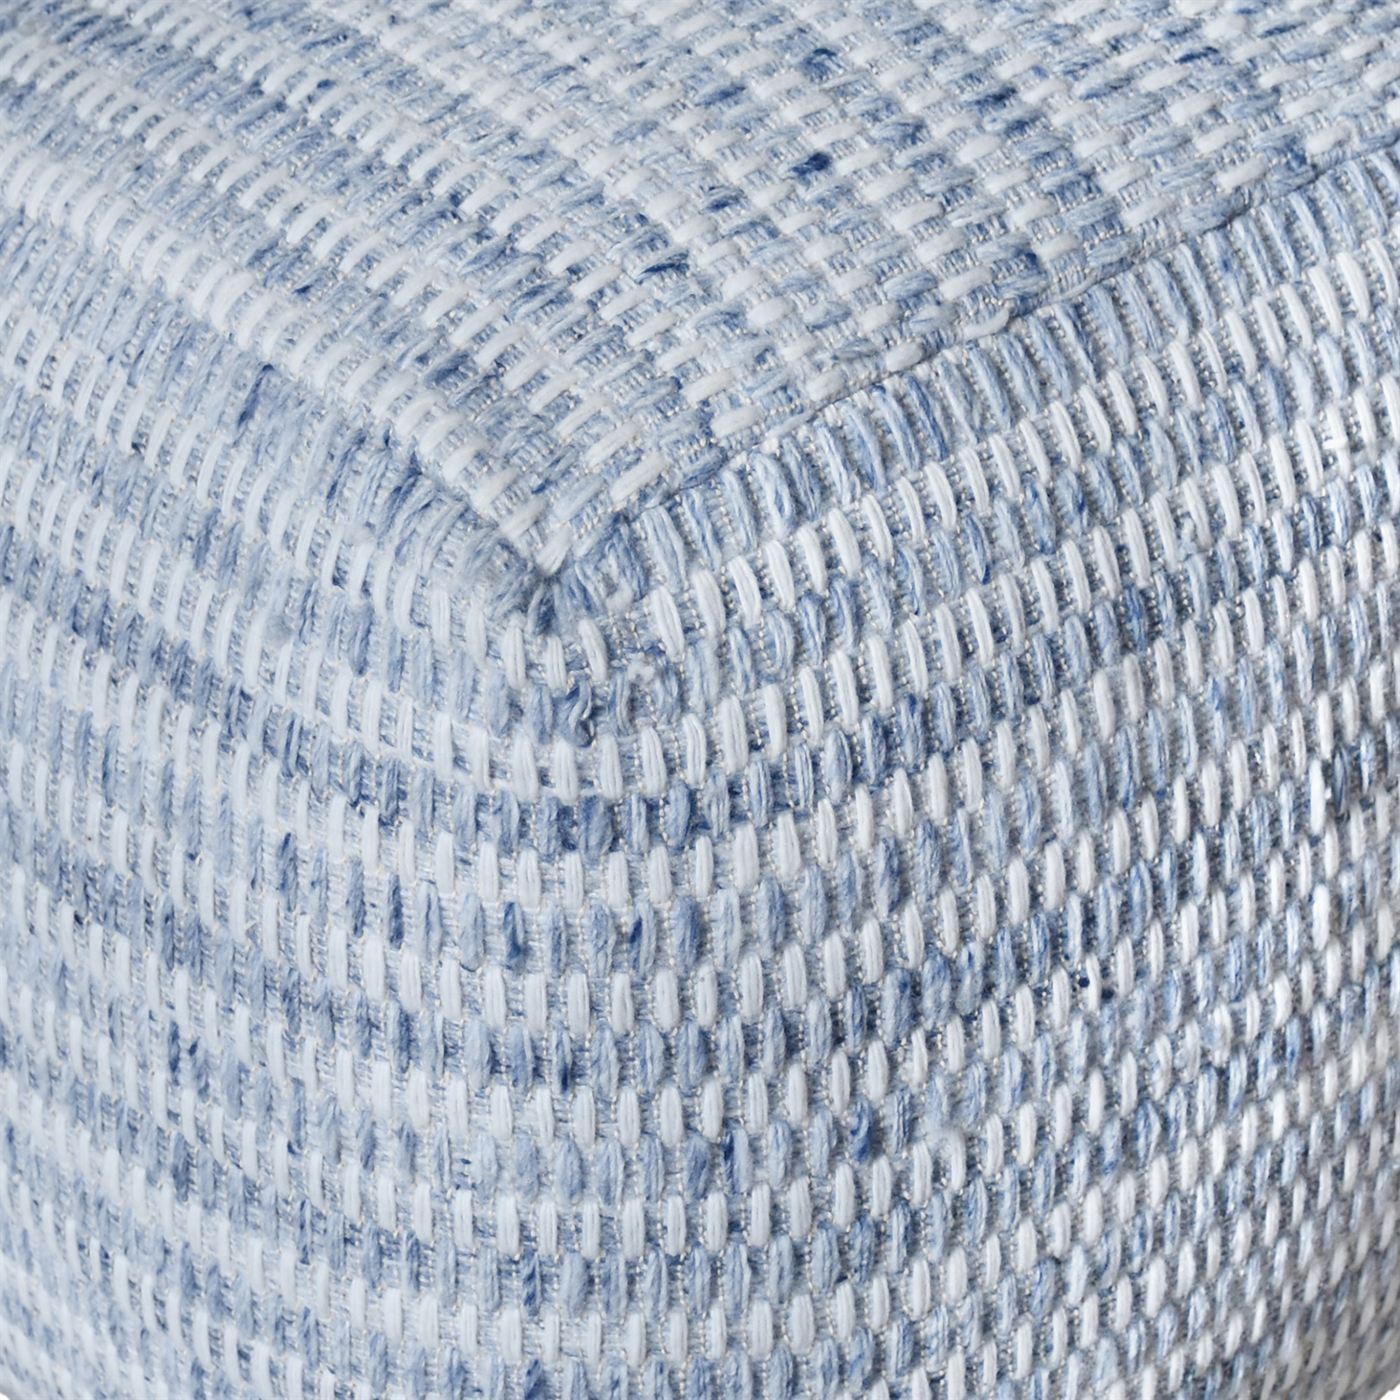 Hattem Pouf, Pet, Natural White, Blue, Hand woven, Flat Weave 